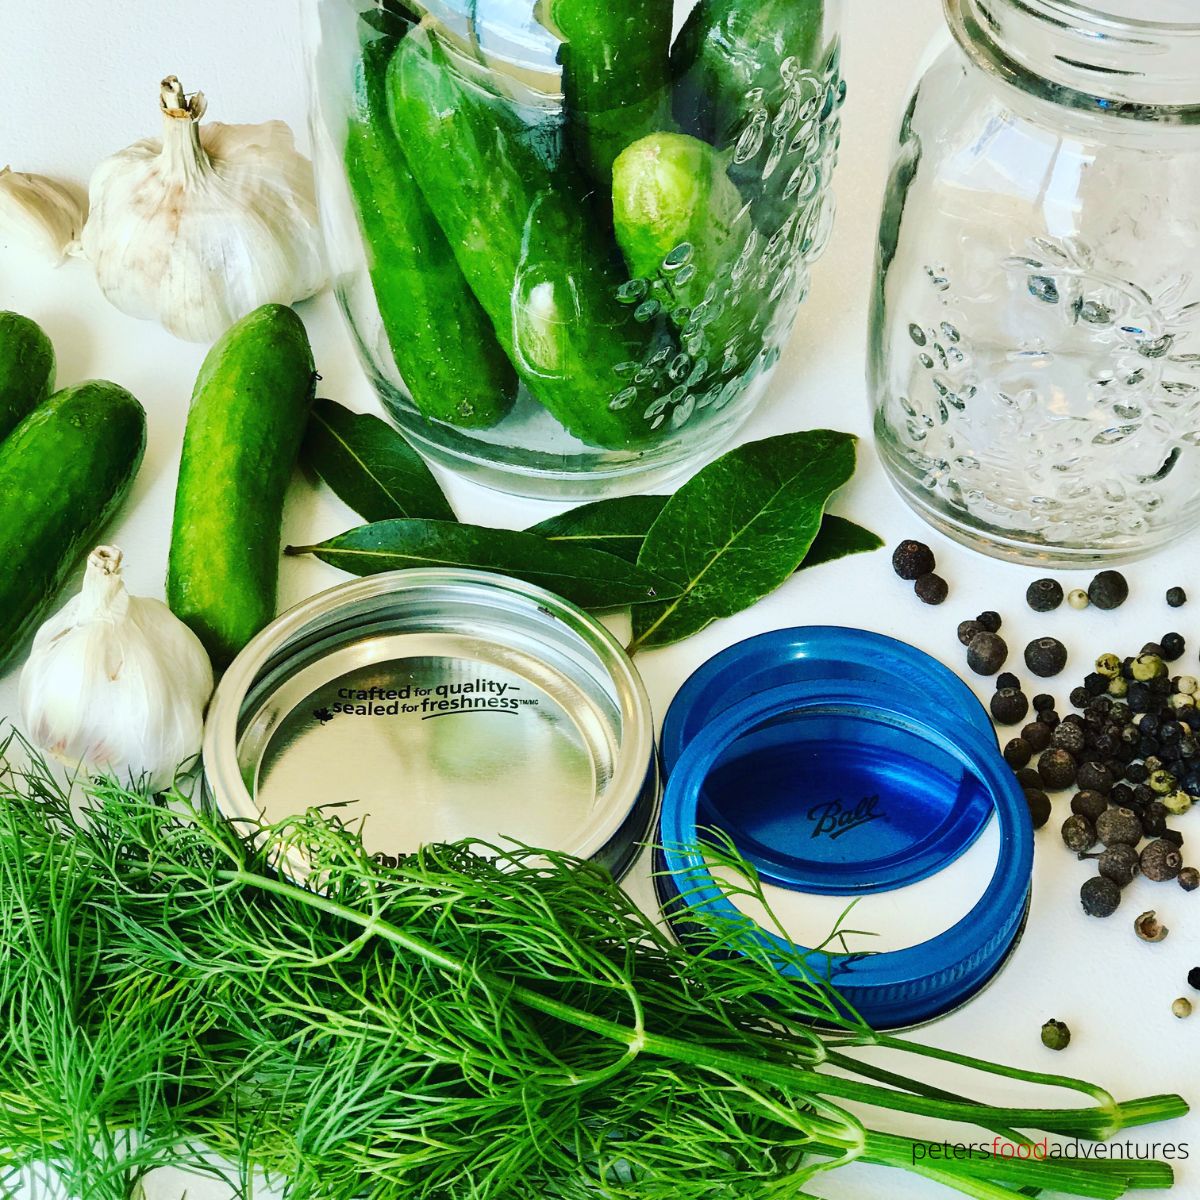 dill pickle ingredients